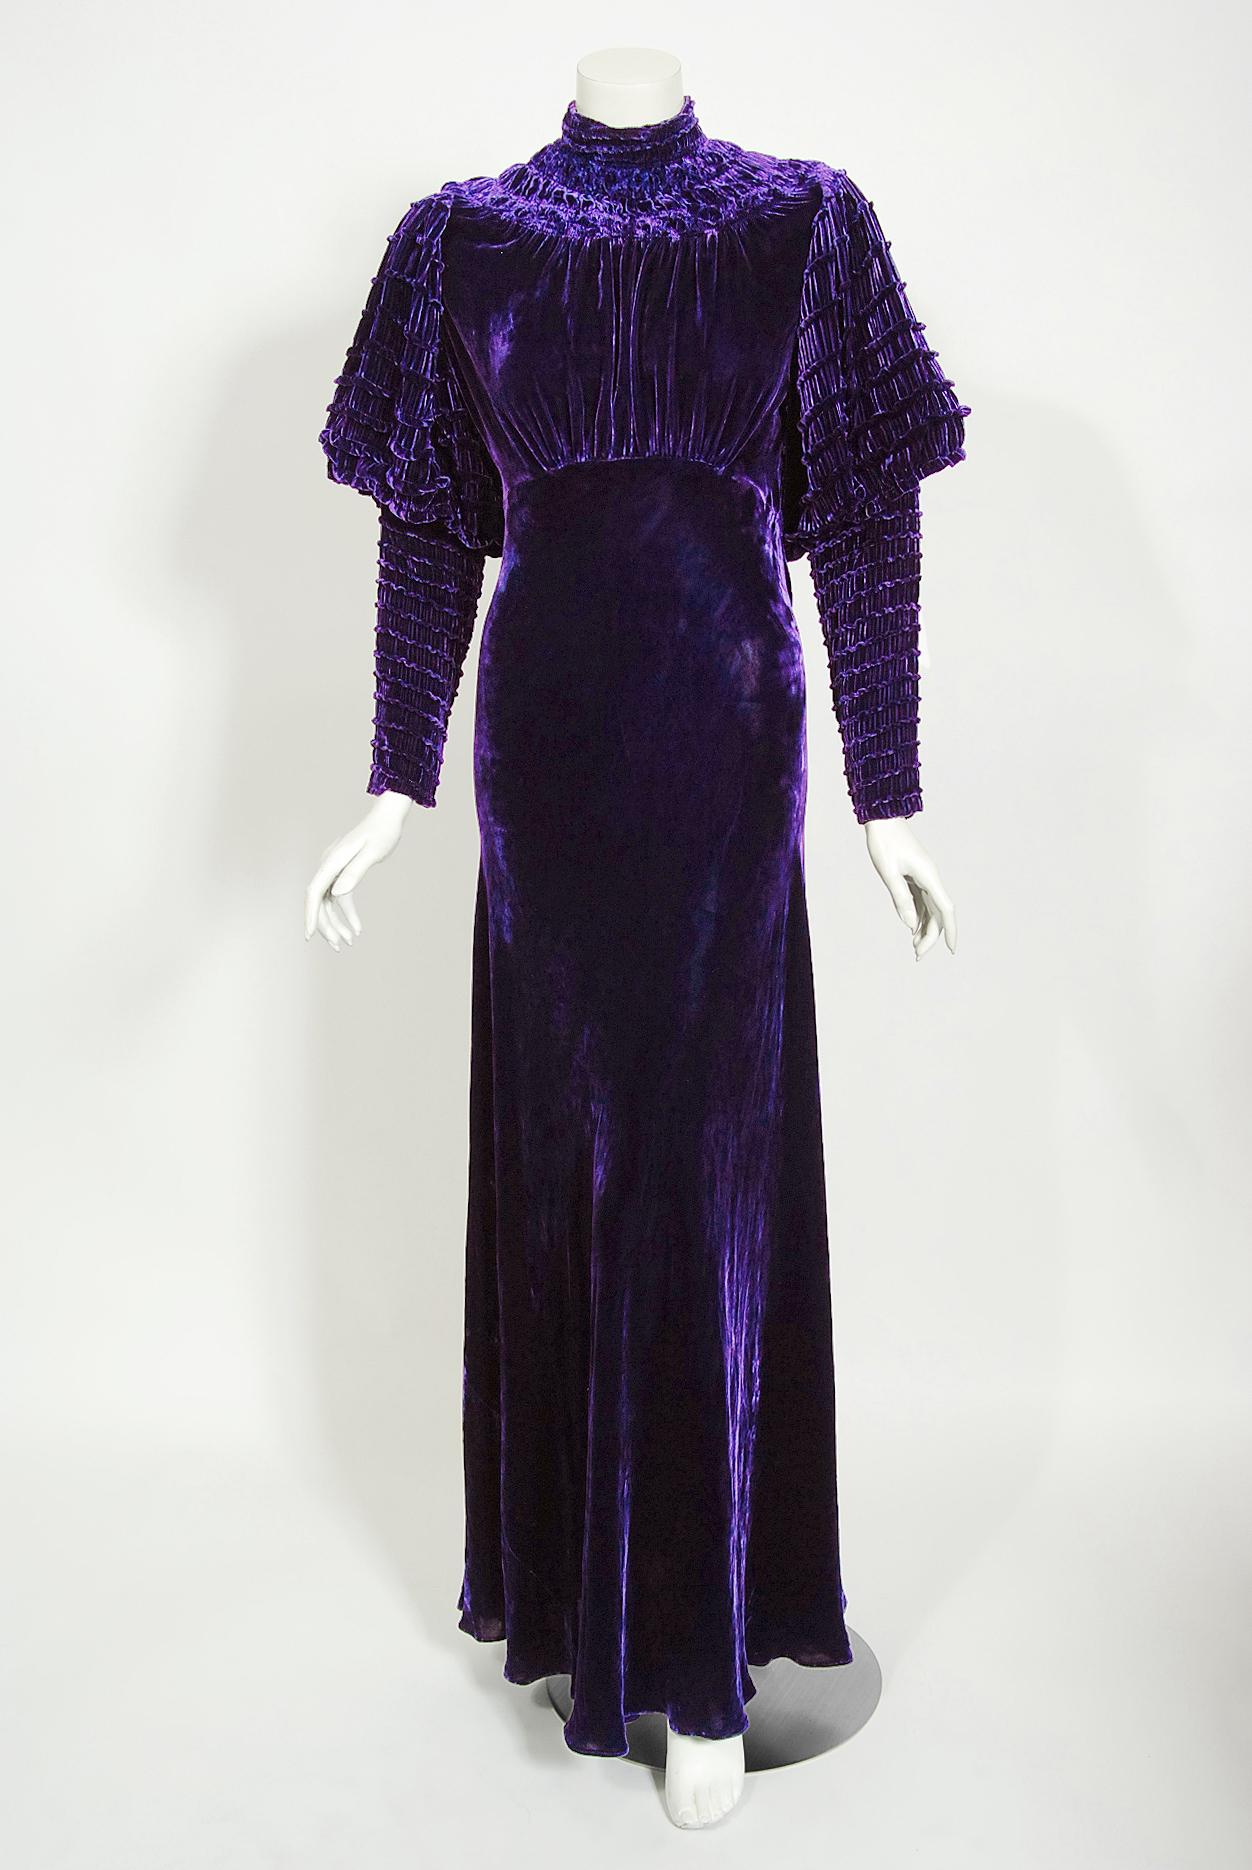 There are lots of lovely 1930's garments still around, but every once in a while I come across one that sets my heart a flutter! This is an extraordinarily beautiful and exceptional museum quality 1930's royal purple silk velvet bias-cut gown. Old